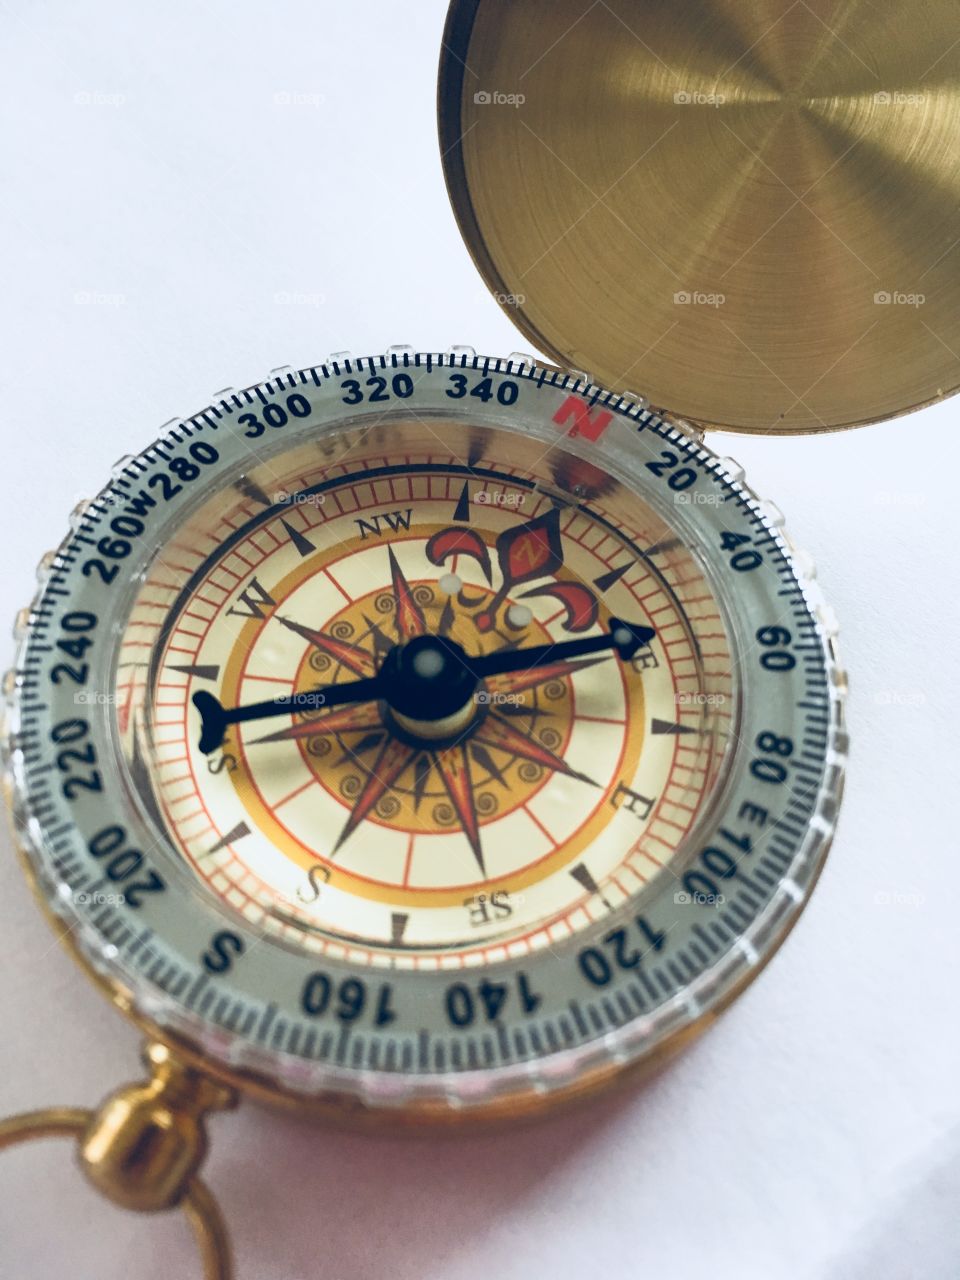 Gold and black compass facing North East direction. 